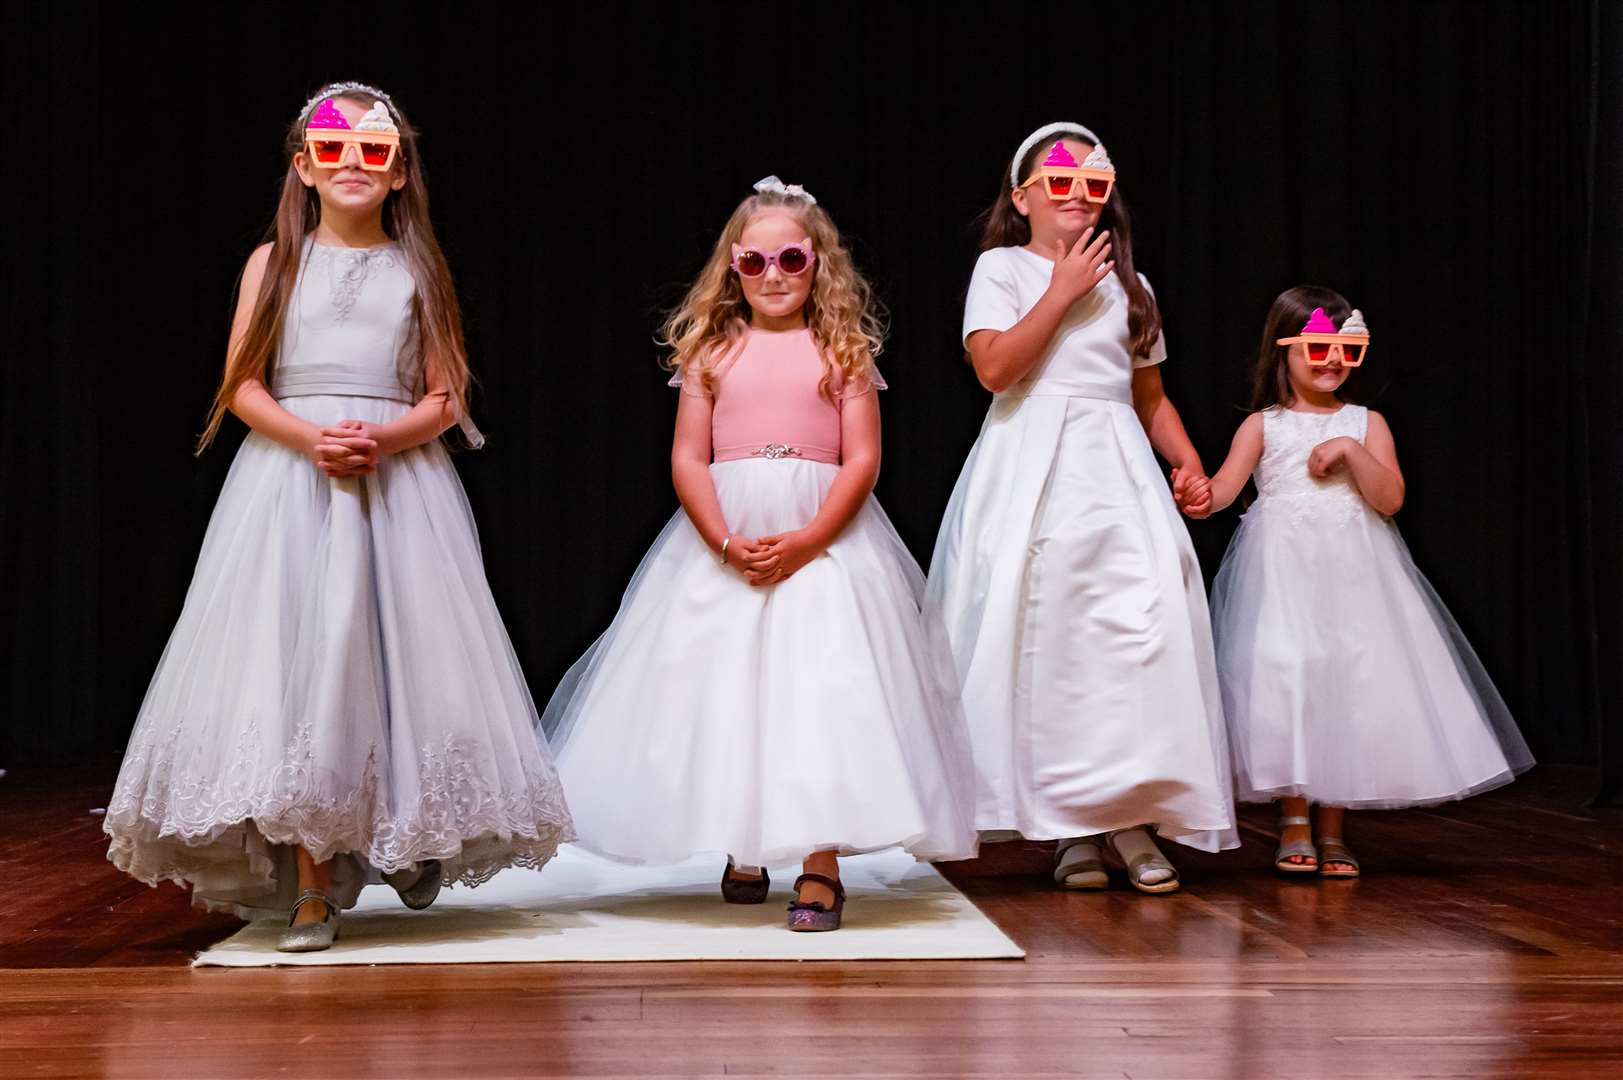 These cool flower girls stole the show.